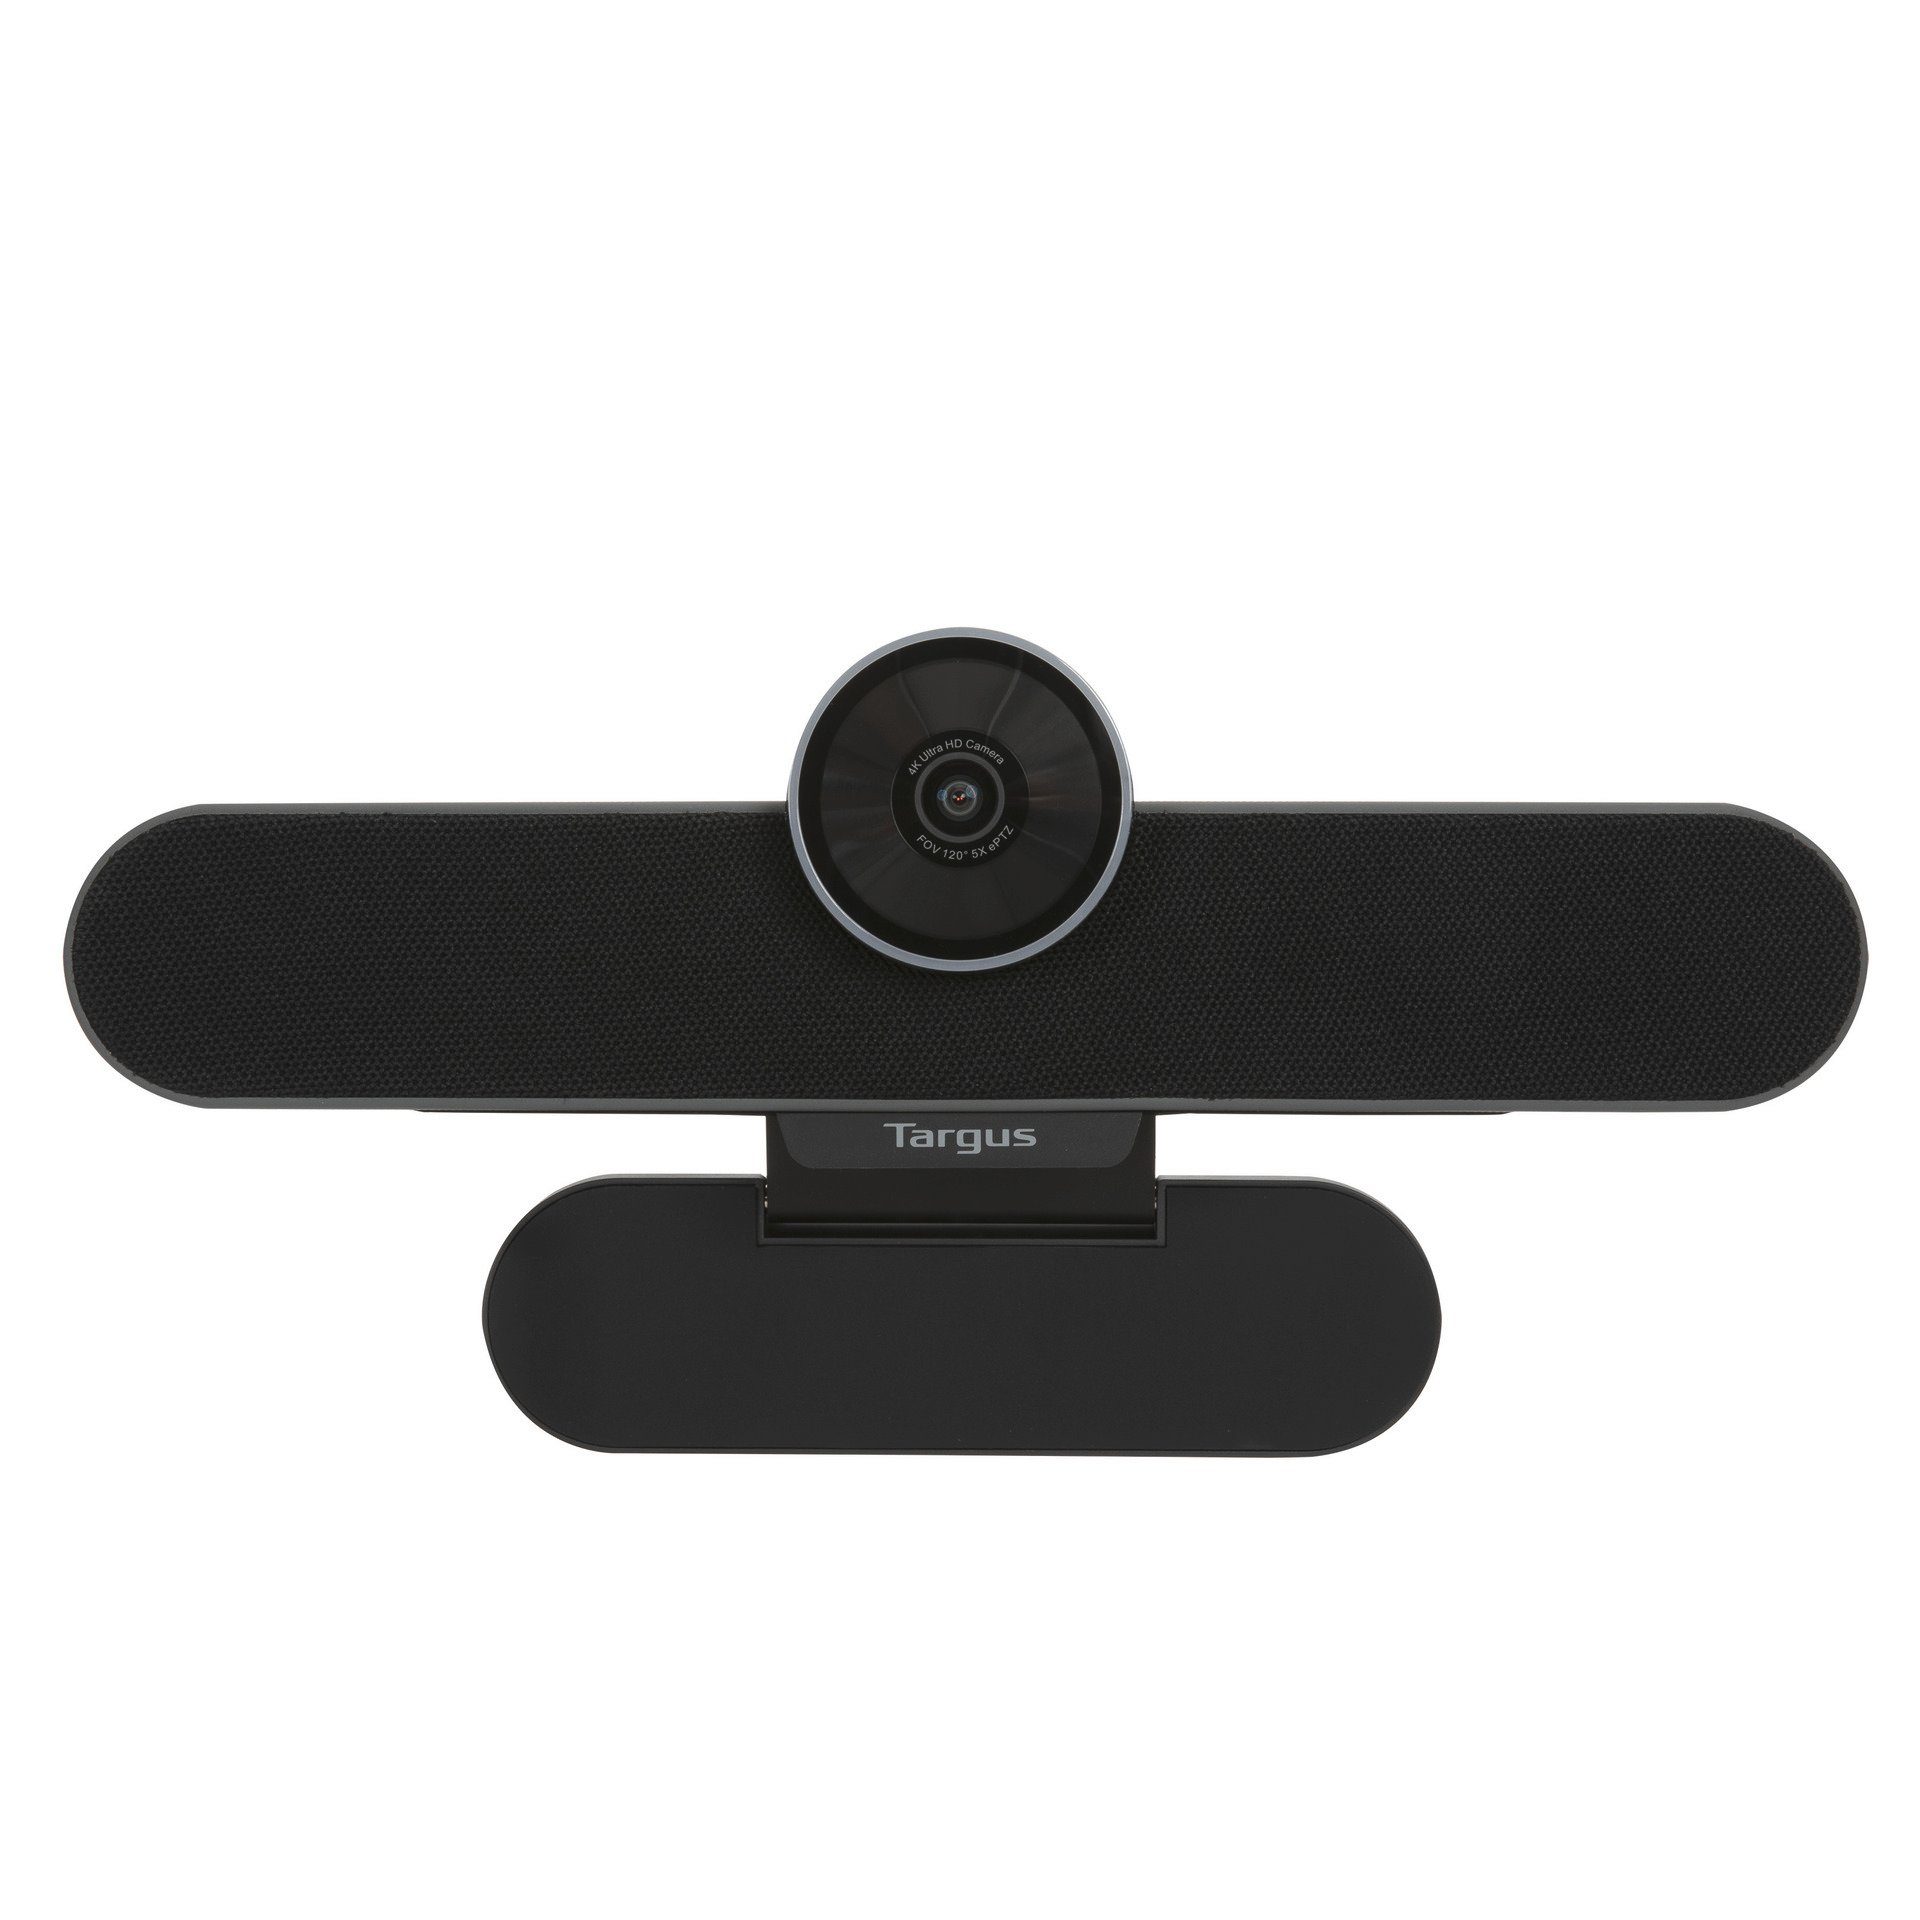 Targus All-in-One 4K Ultra (4K HD, Webcam Netzteil) System Mit EU Conference